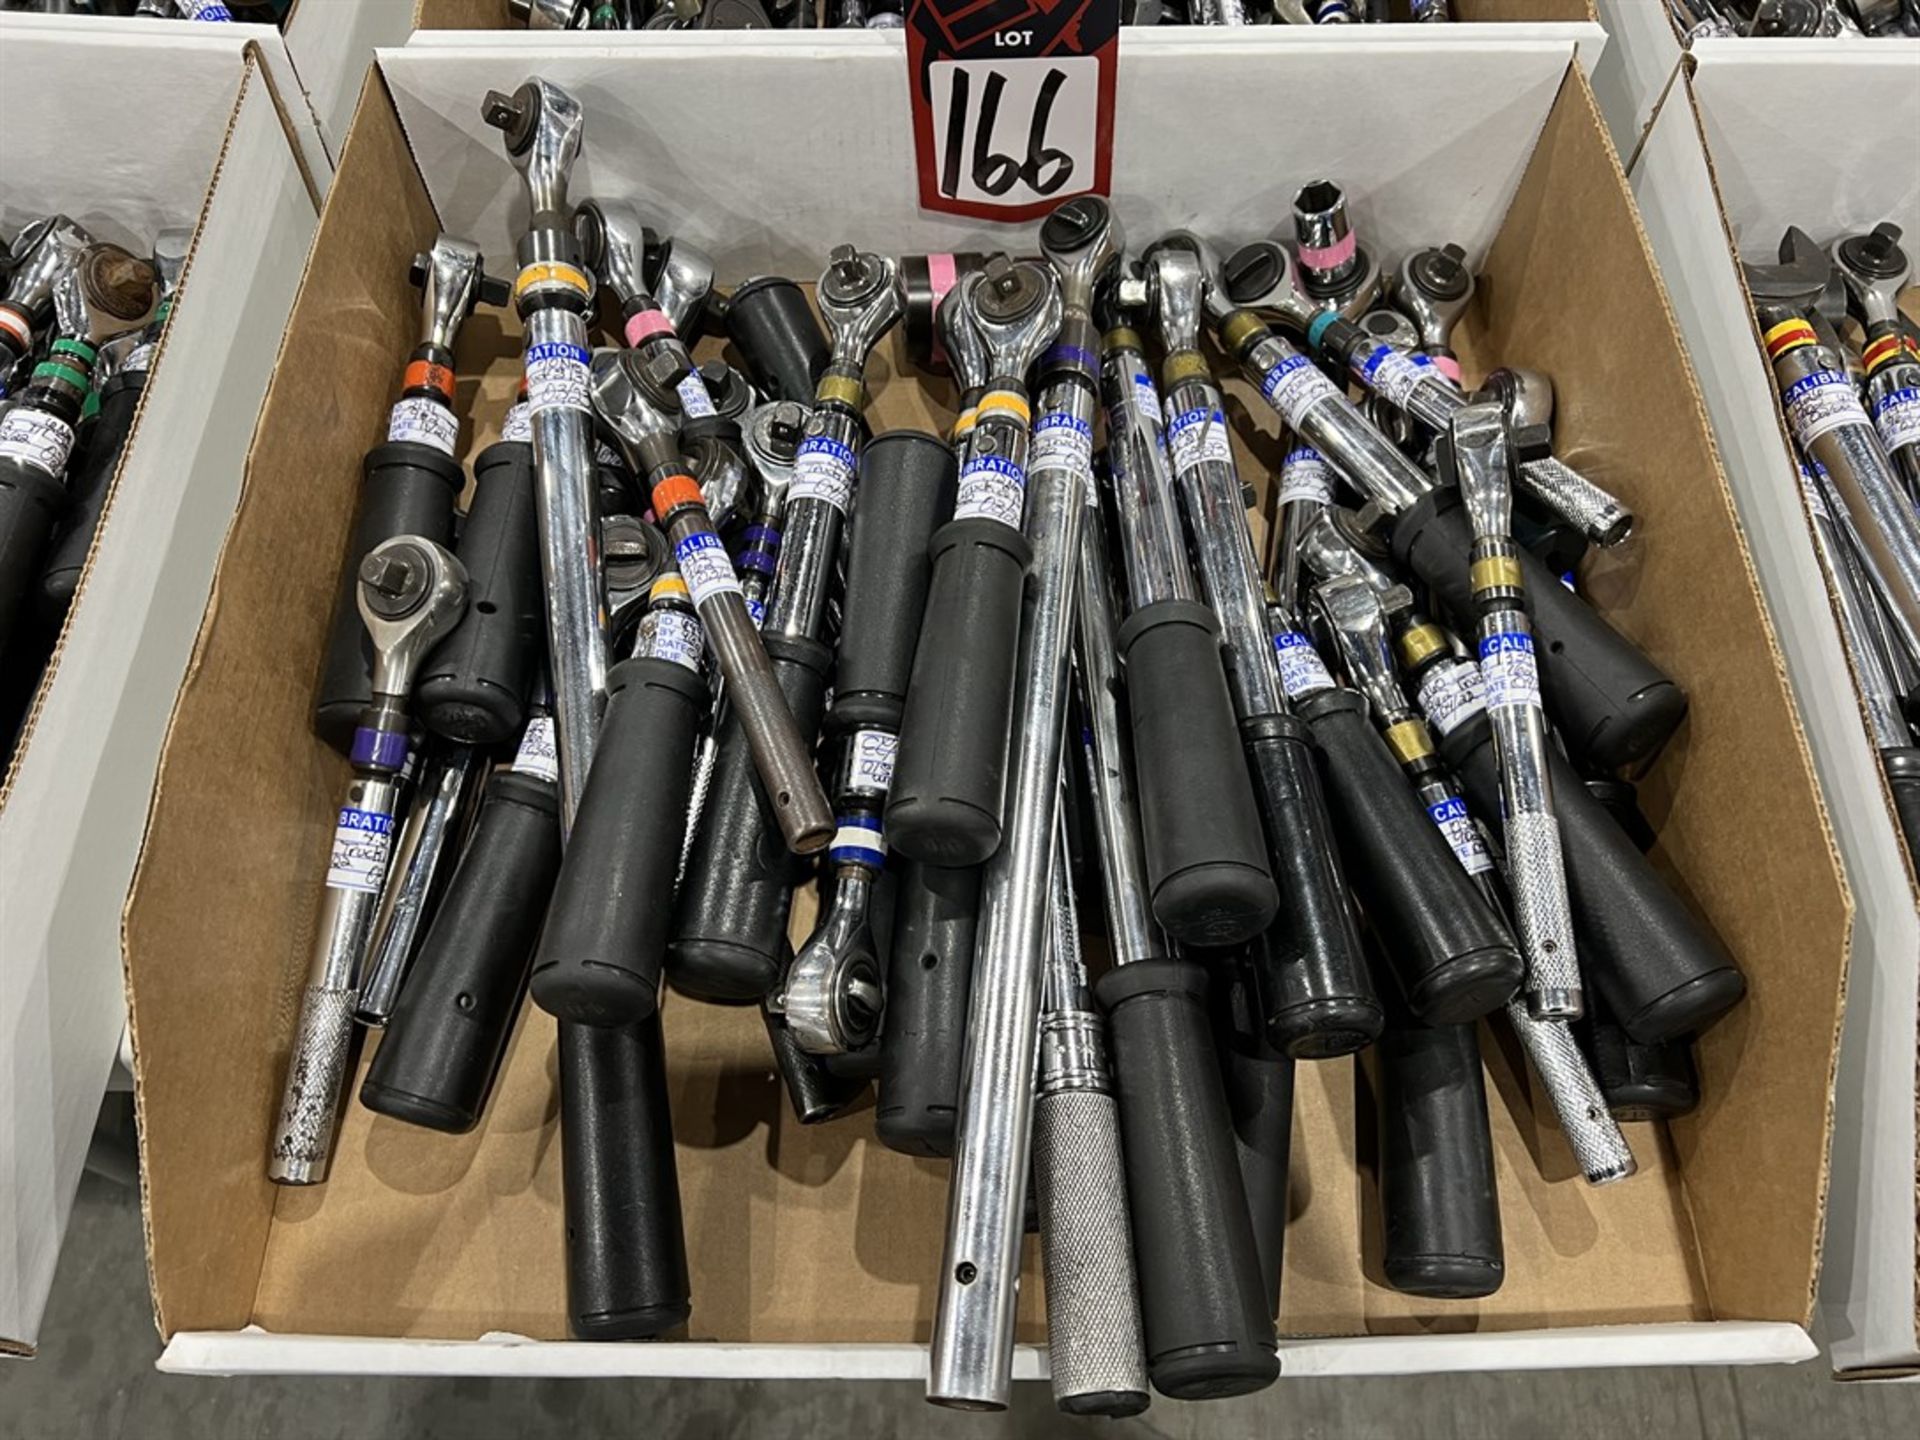 Lot of Assorted Torque Wrenches